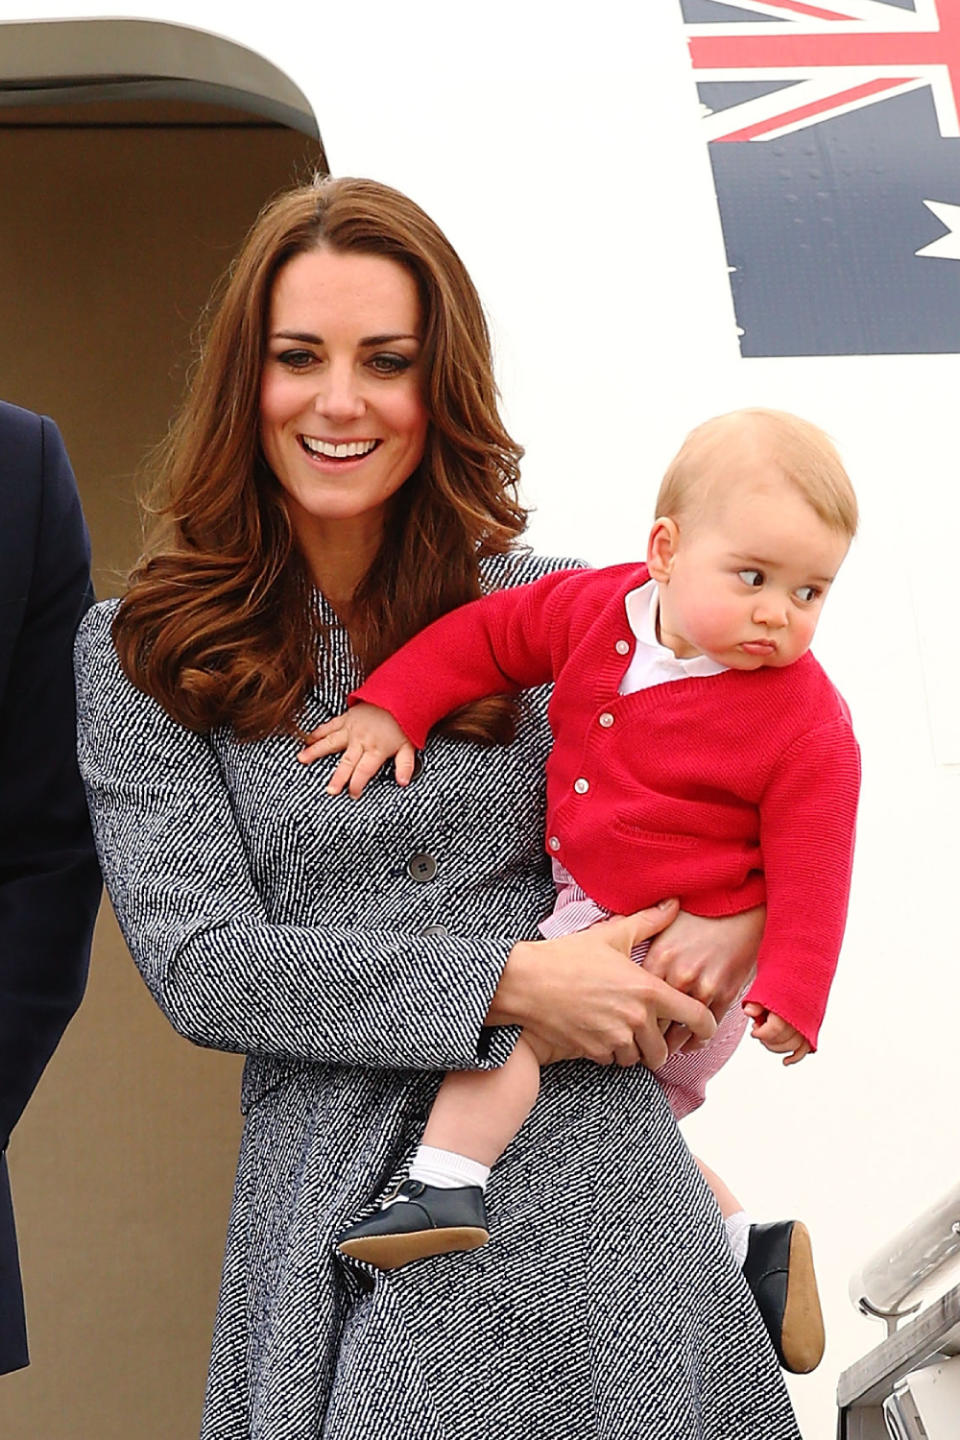 Babies can go on royal tours straight away